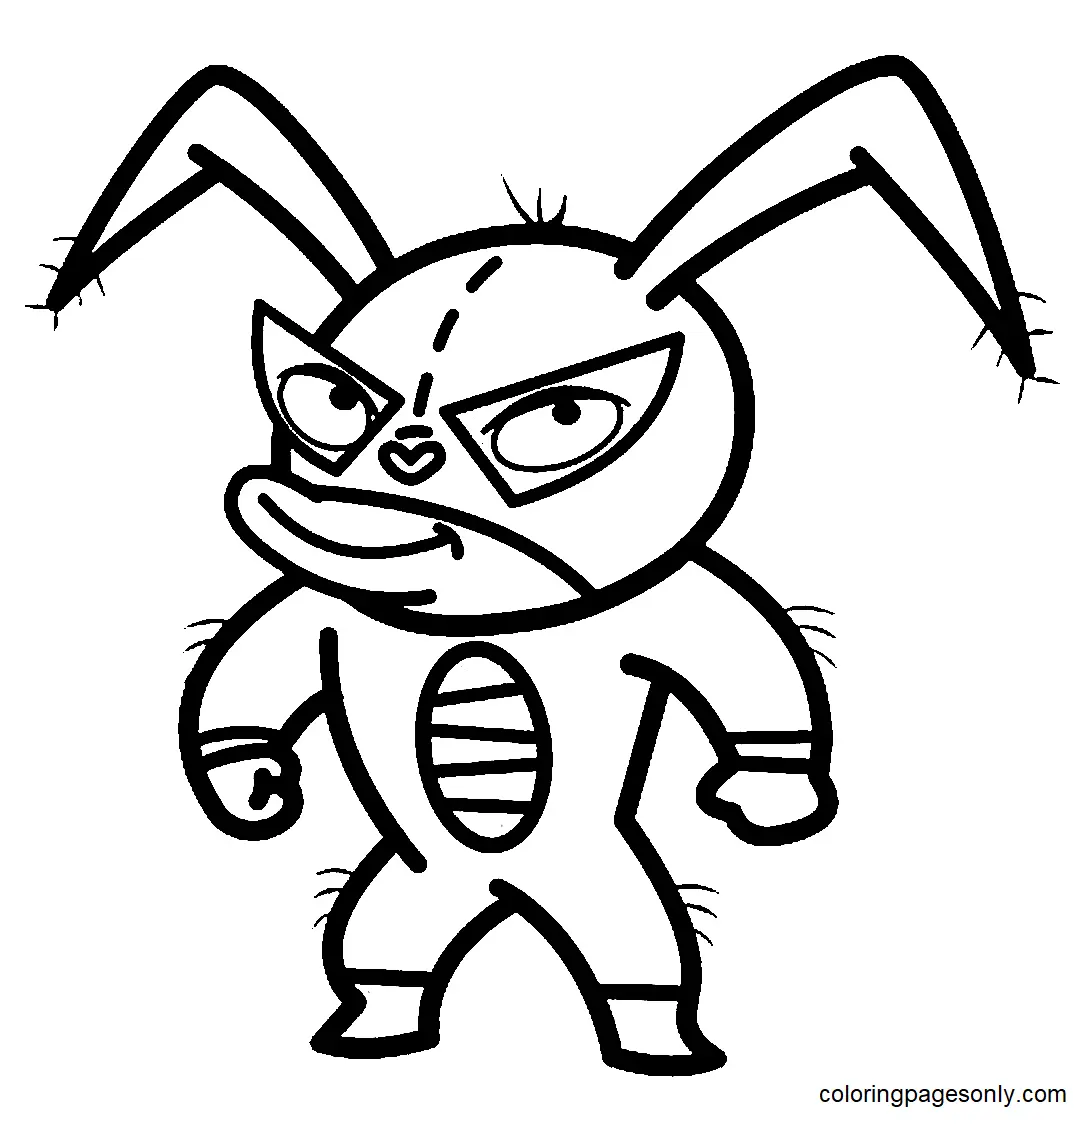 Mucha Lucha Coloring Pages